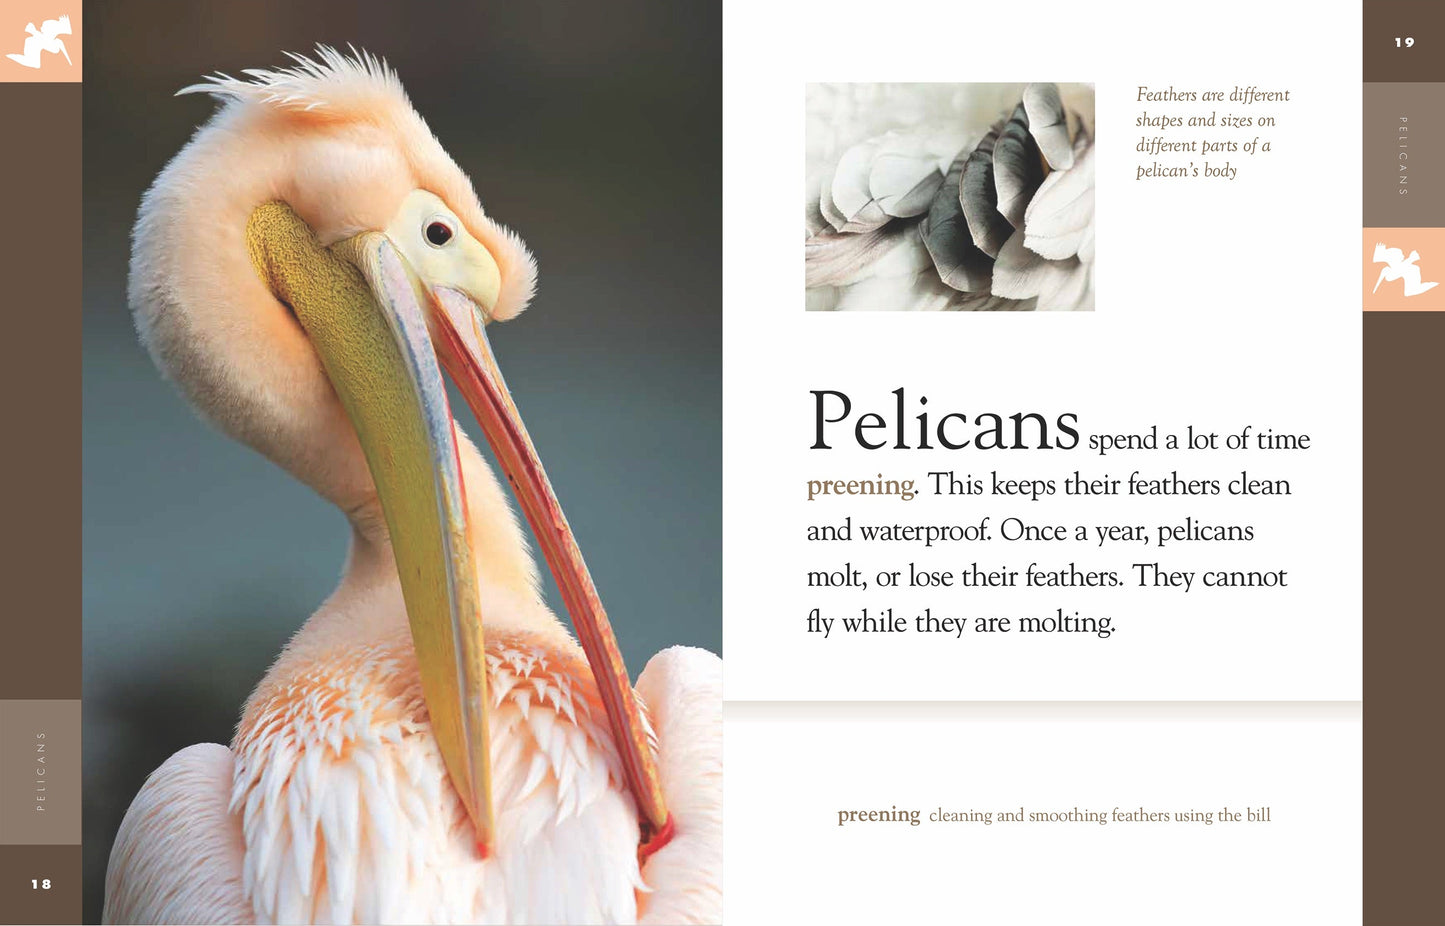 Amazing Animals - Classic Edition: Pelicans by The Creative Company Shop